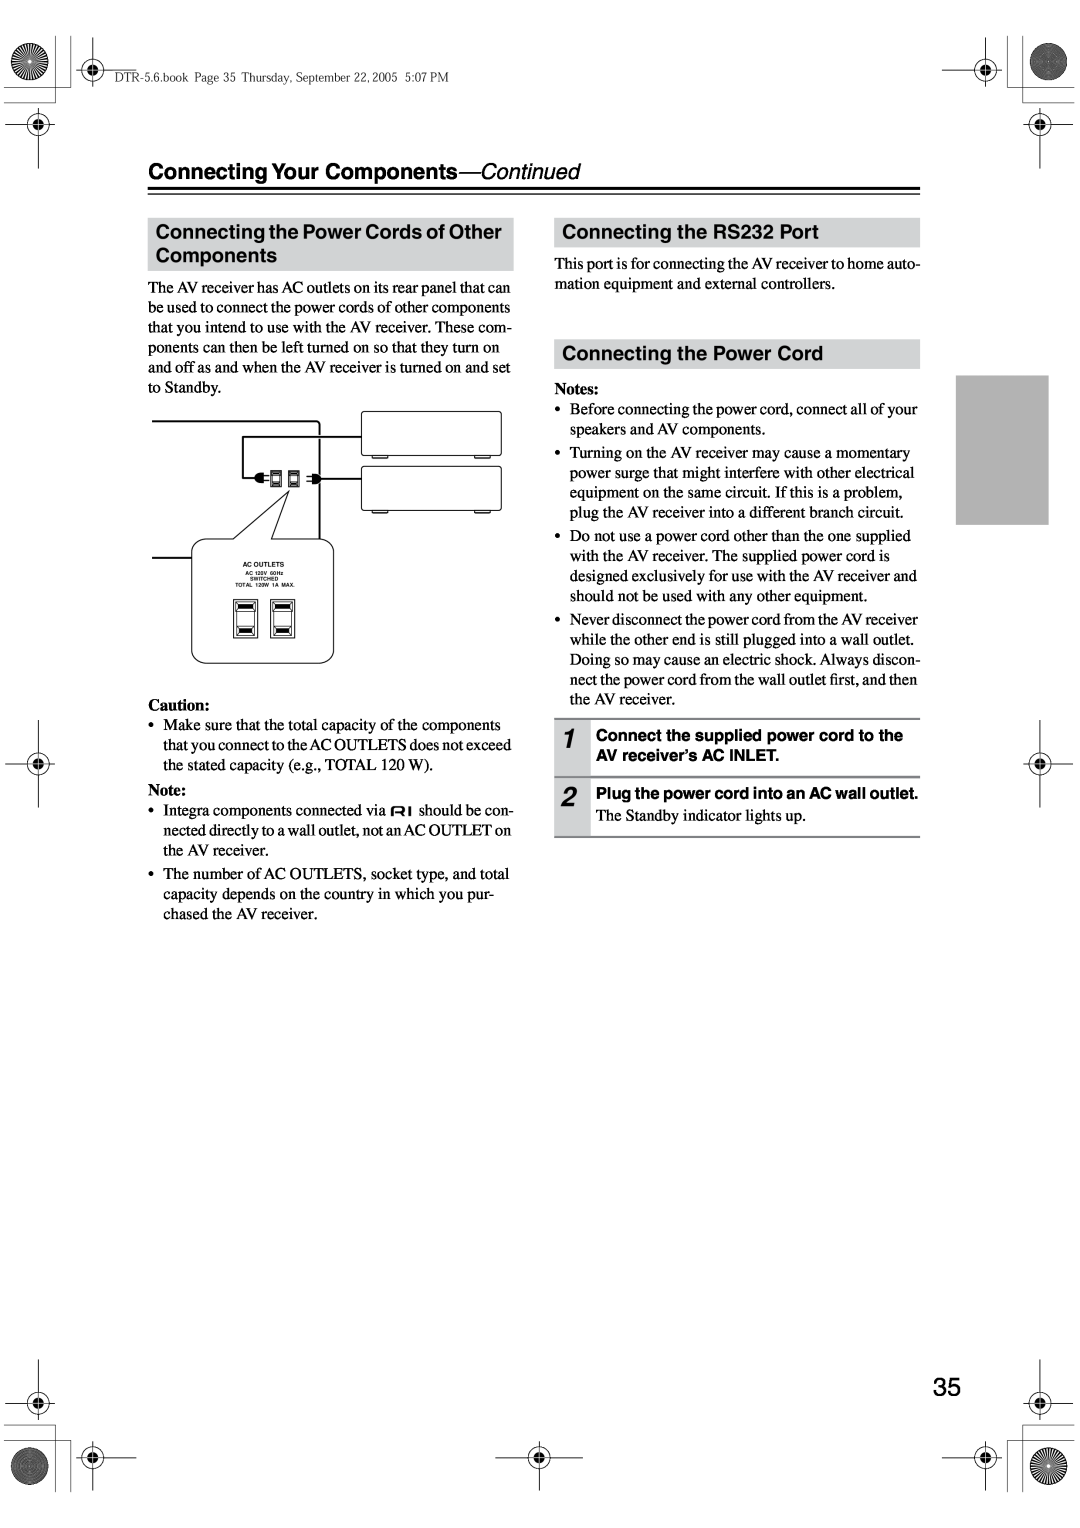 Integra DTR-5.6 instruction manual Connecting the Power Cords of Other Components, Connecting the RS232 Port, Notes 